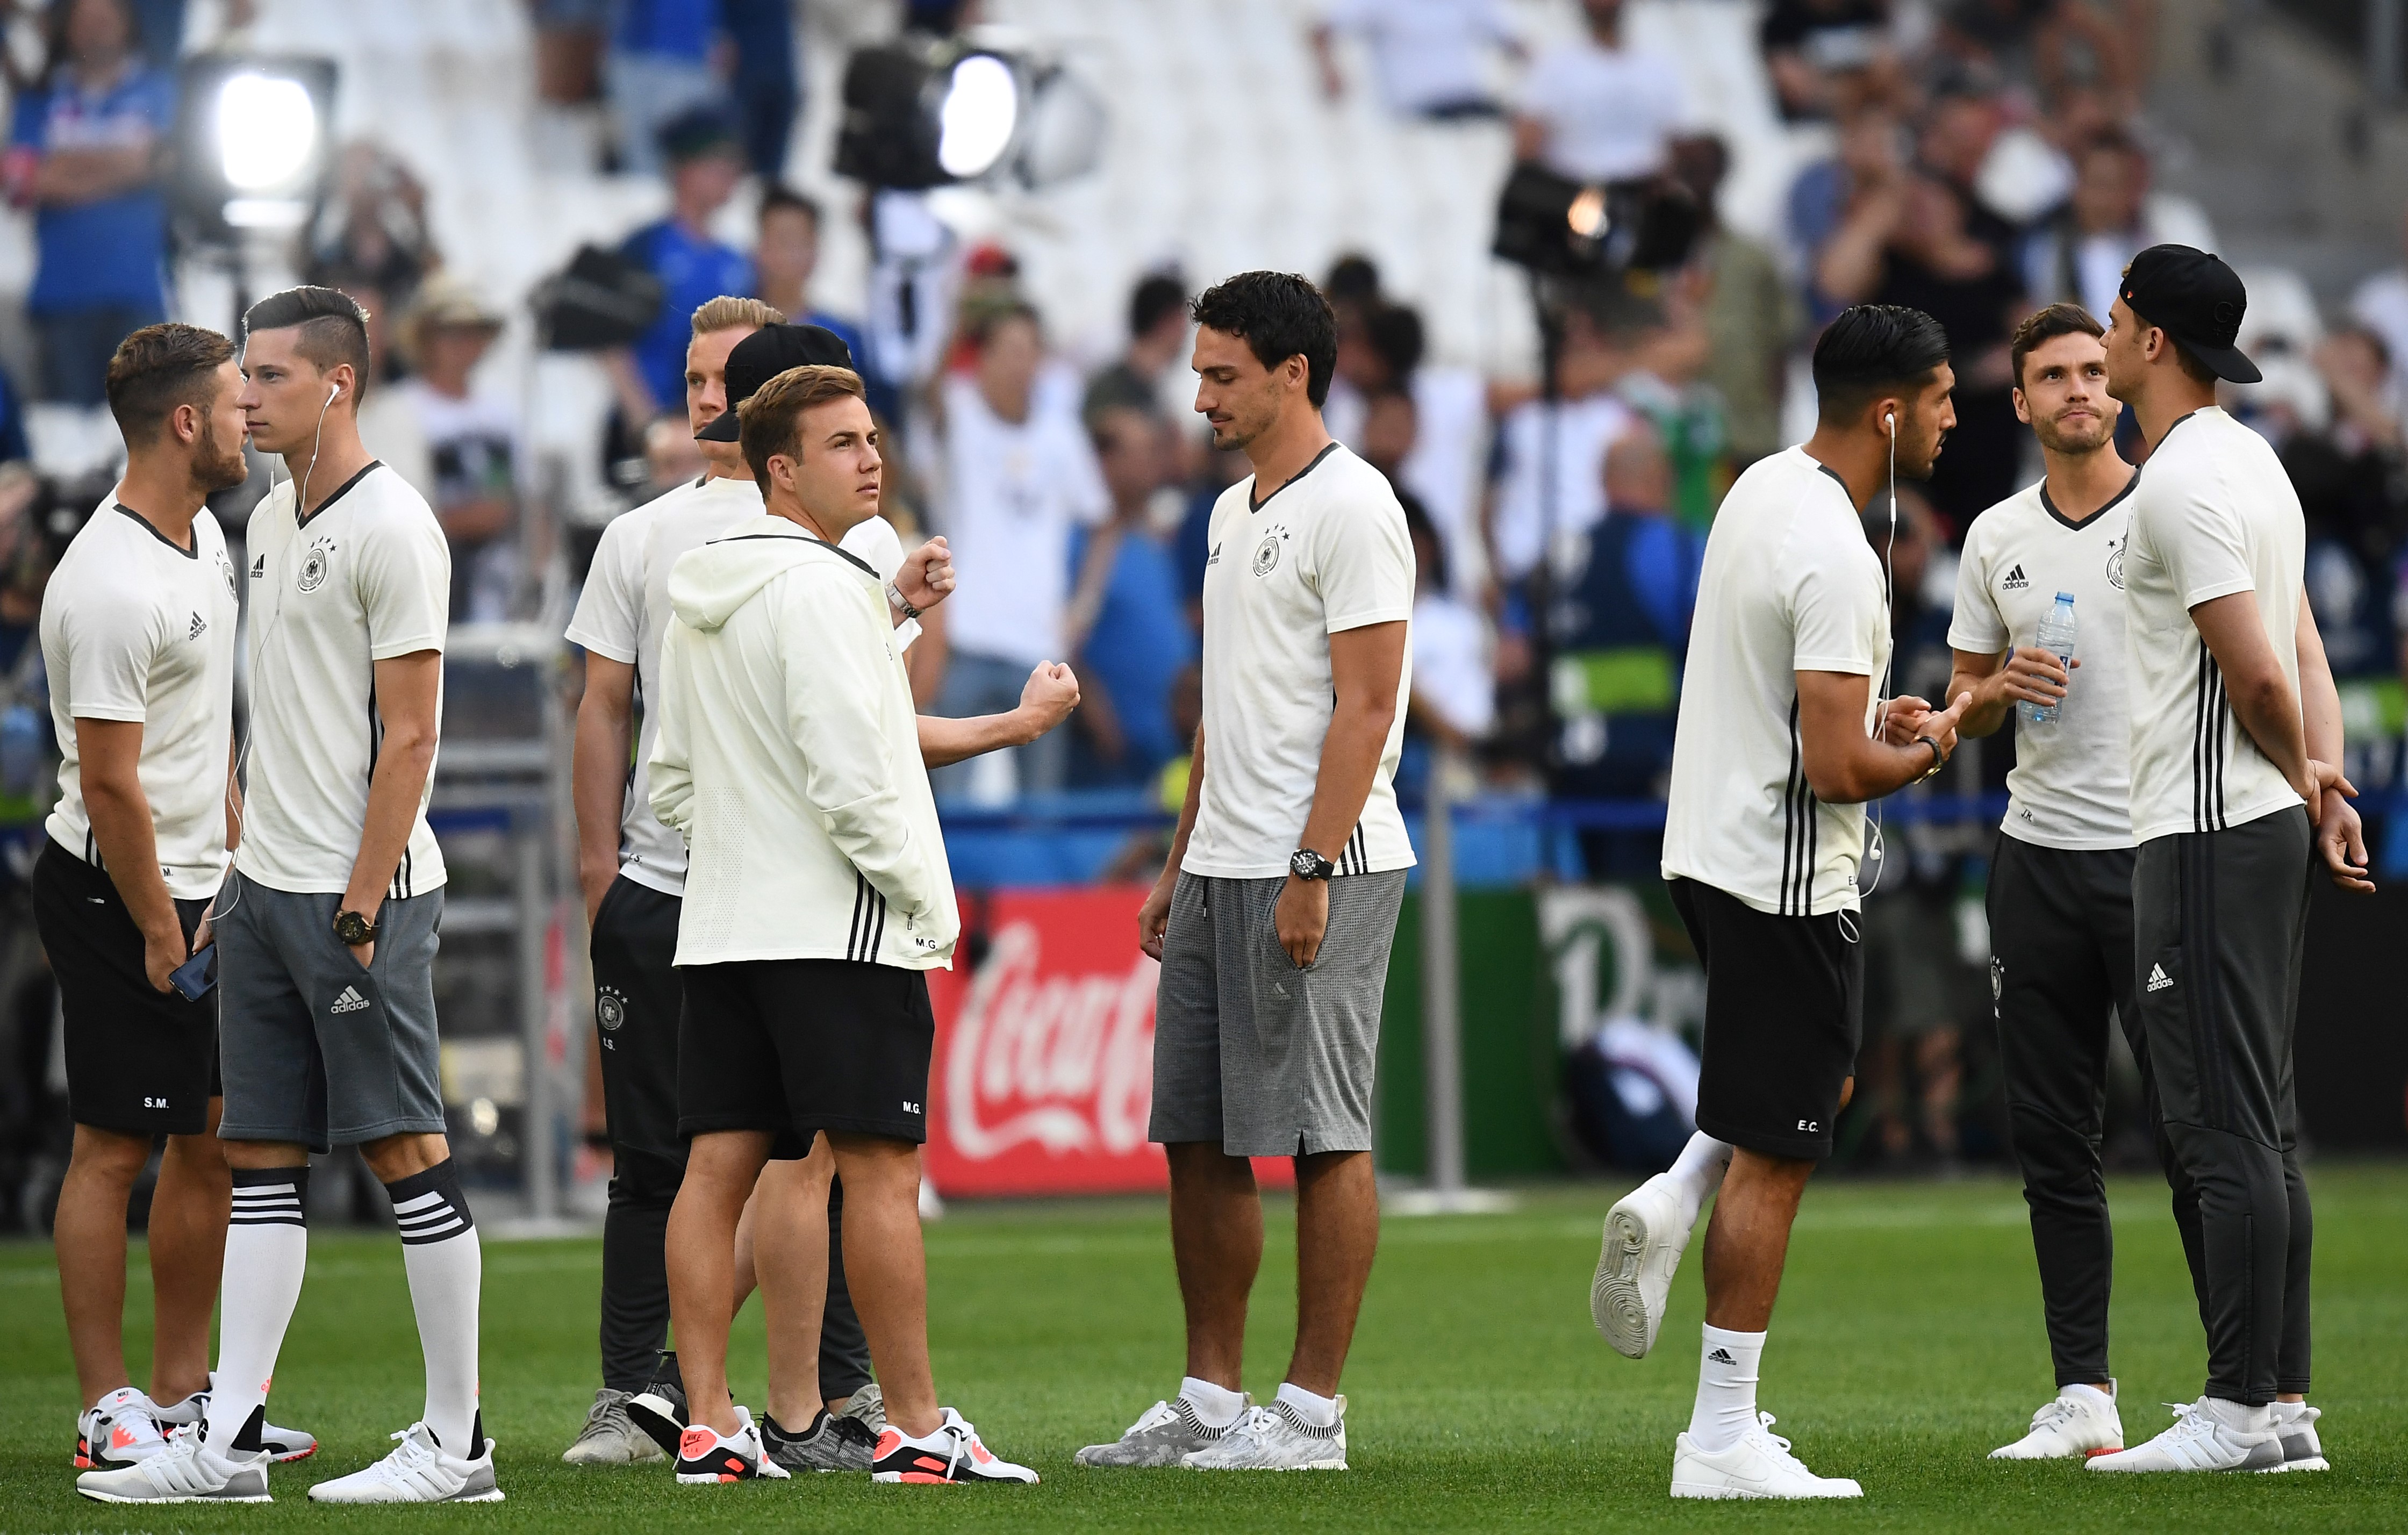 From left : Germany's midfielder Julian Draxler, forward Mario Goetze, defender Mats Hummels, defender Emre Can, defender Jonas Hector and midfielder Julian Weigl stand on the pitch prior to the start of the Euro 2016 semi-final football match between Germany and France at the Stade Velodrome in Marseille on July 7, 2016.
 / AFP / FRANCK FIFE        (Photo credit should read FRANCK FIFE/AFP/Getty Images)